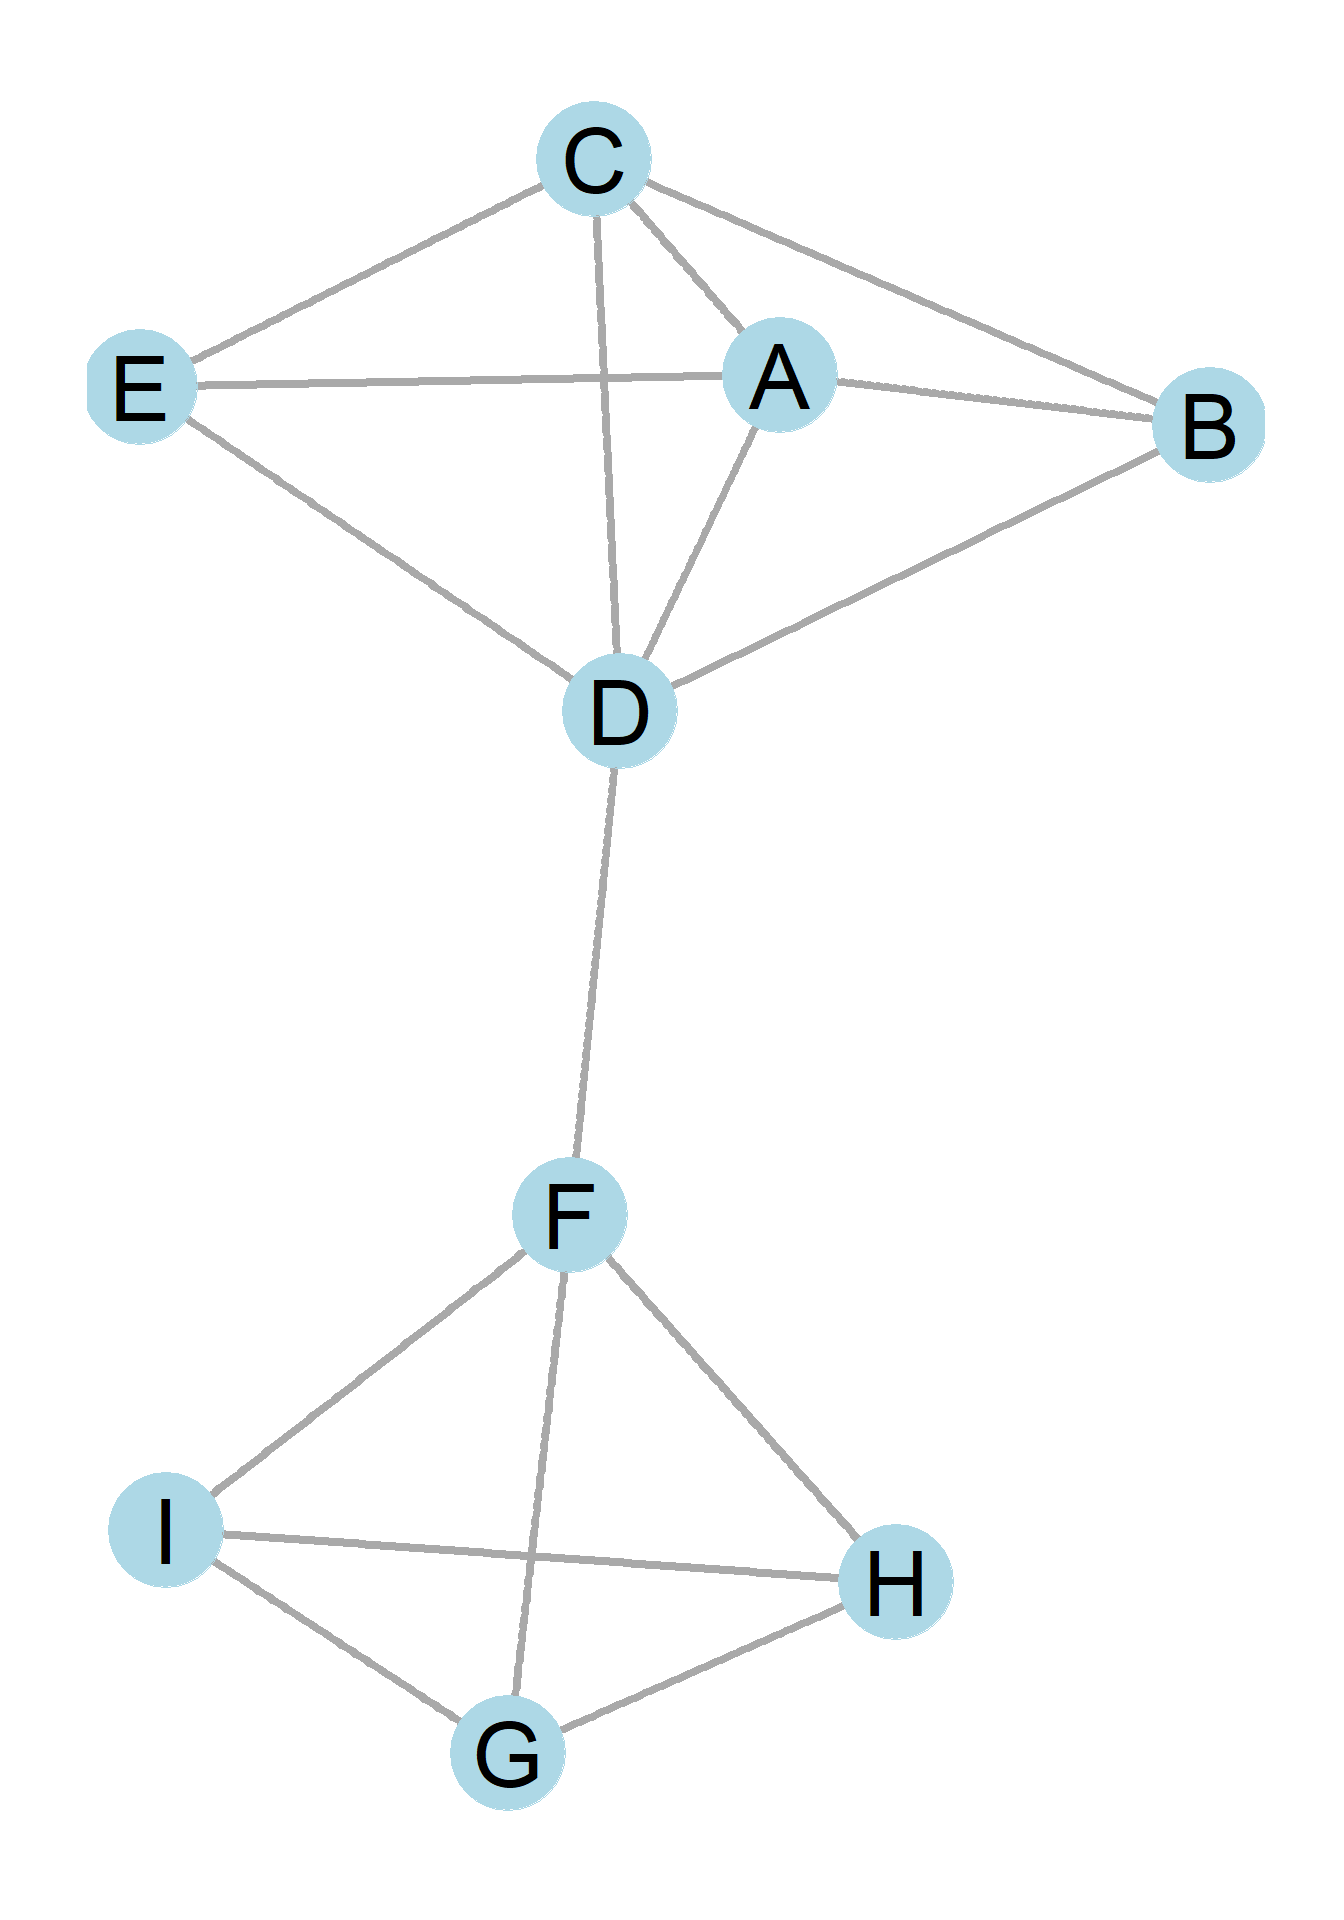 A undirected graph